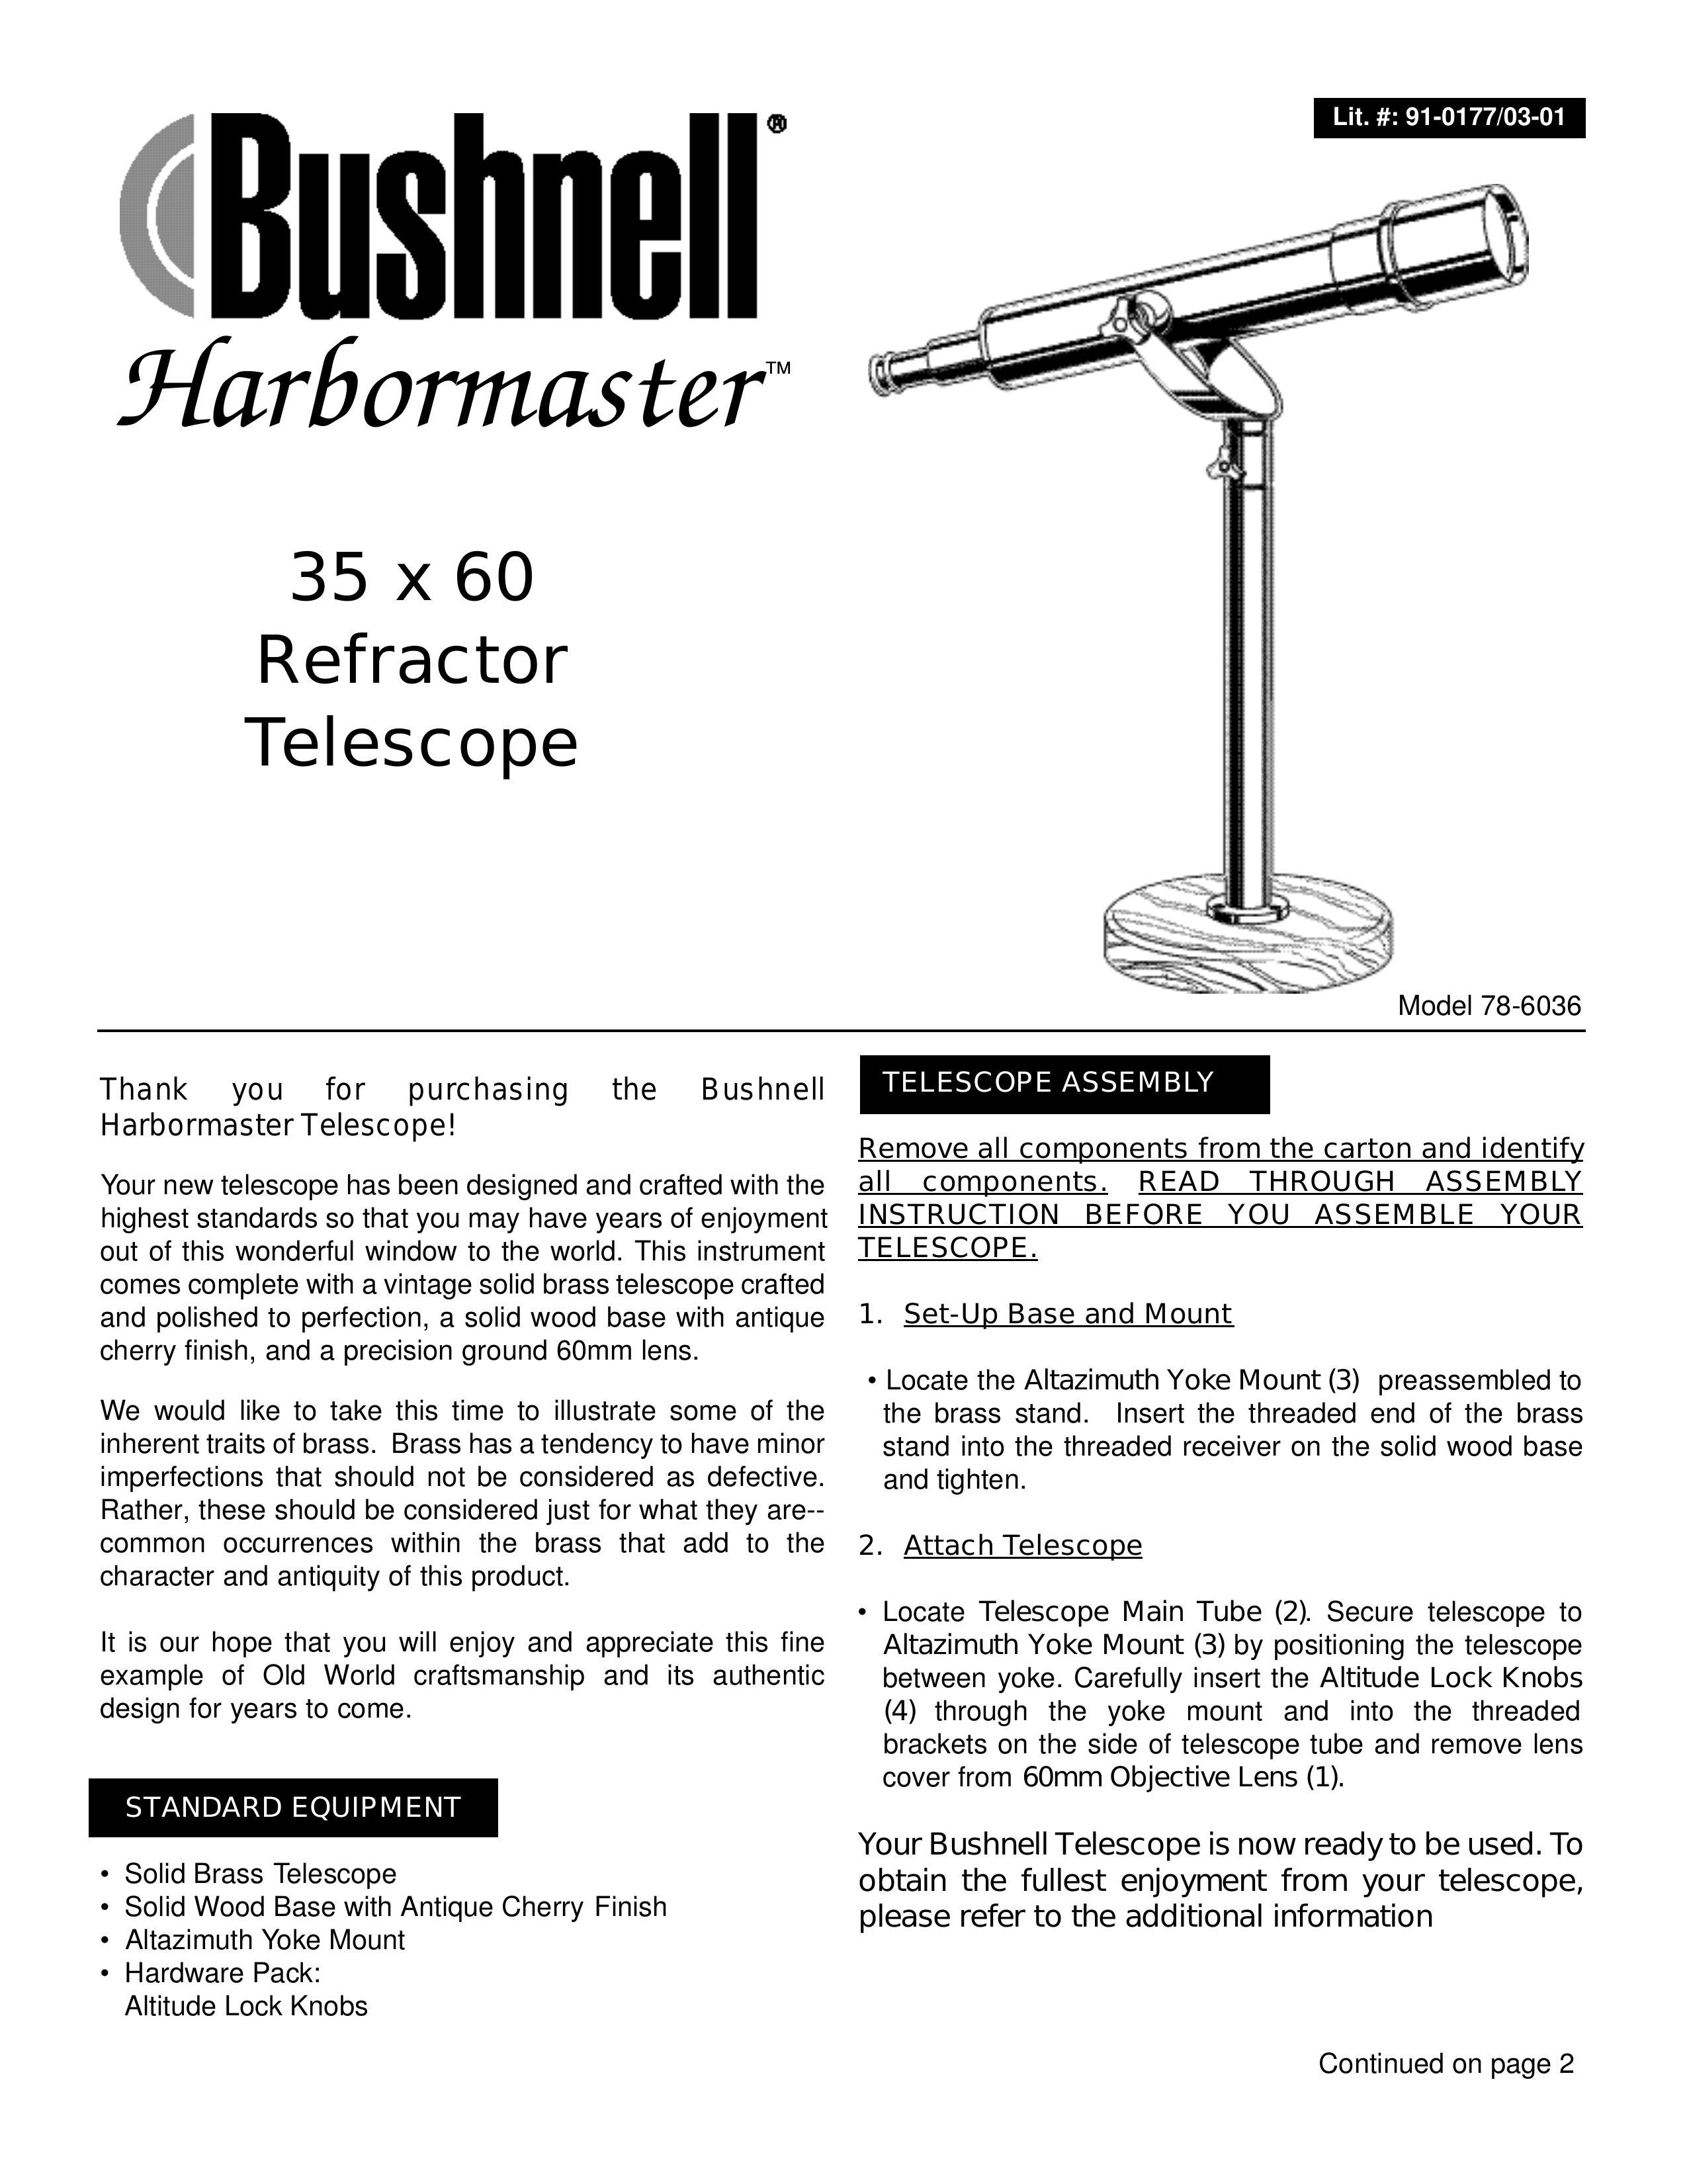 Bushnell 78-6036 Telescope User Manual (Page 1)